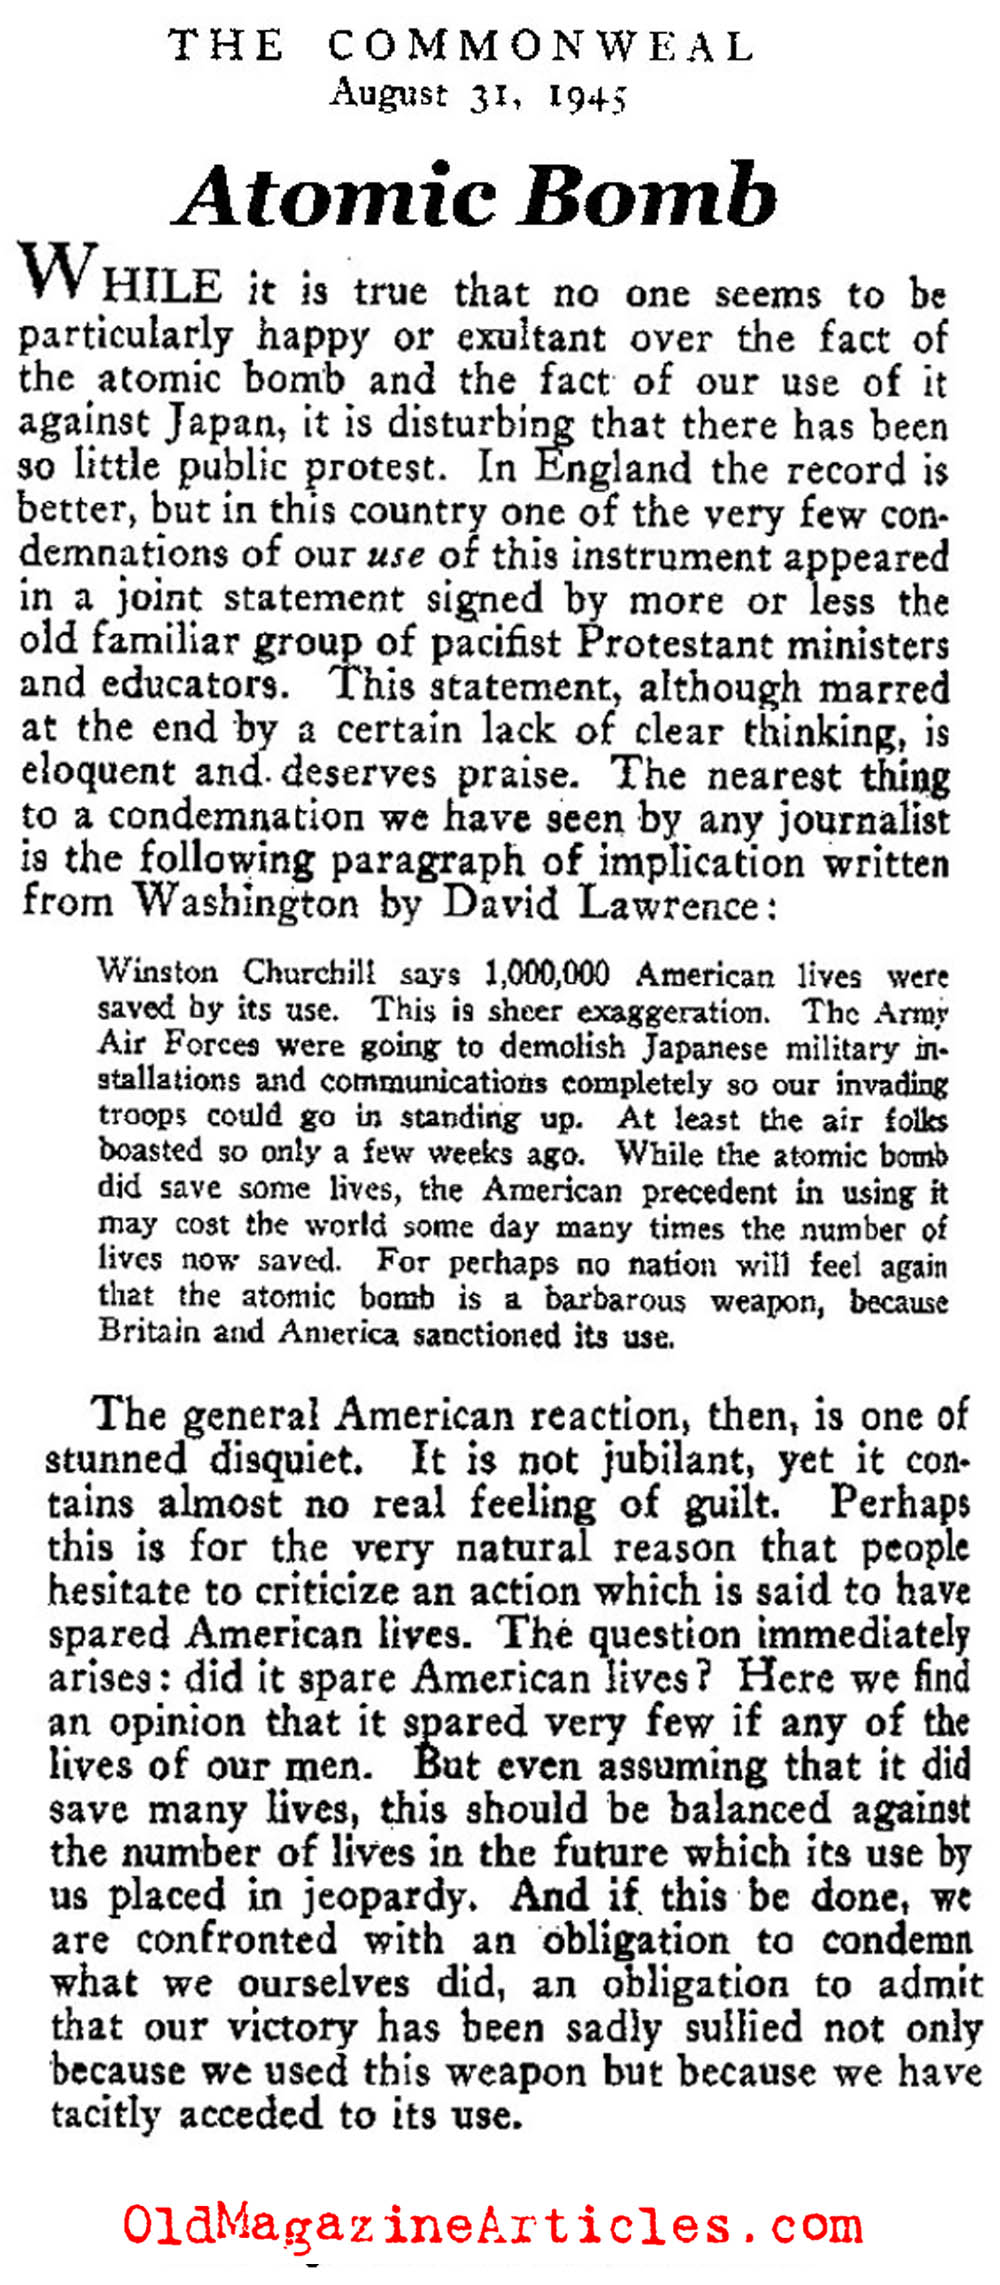 Regretting the A-Bomb (Commonweal Magazine, 1945)